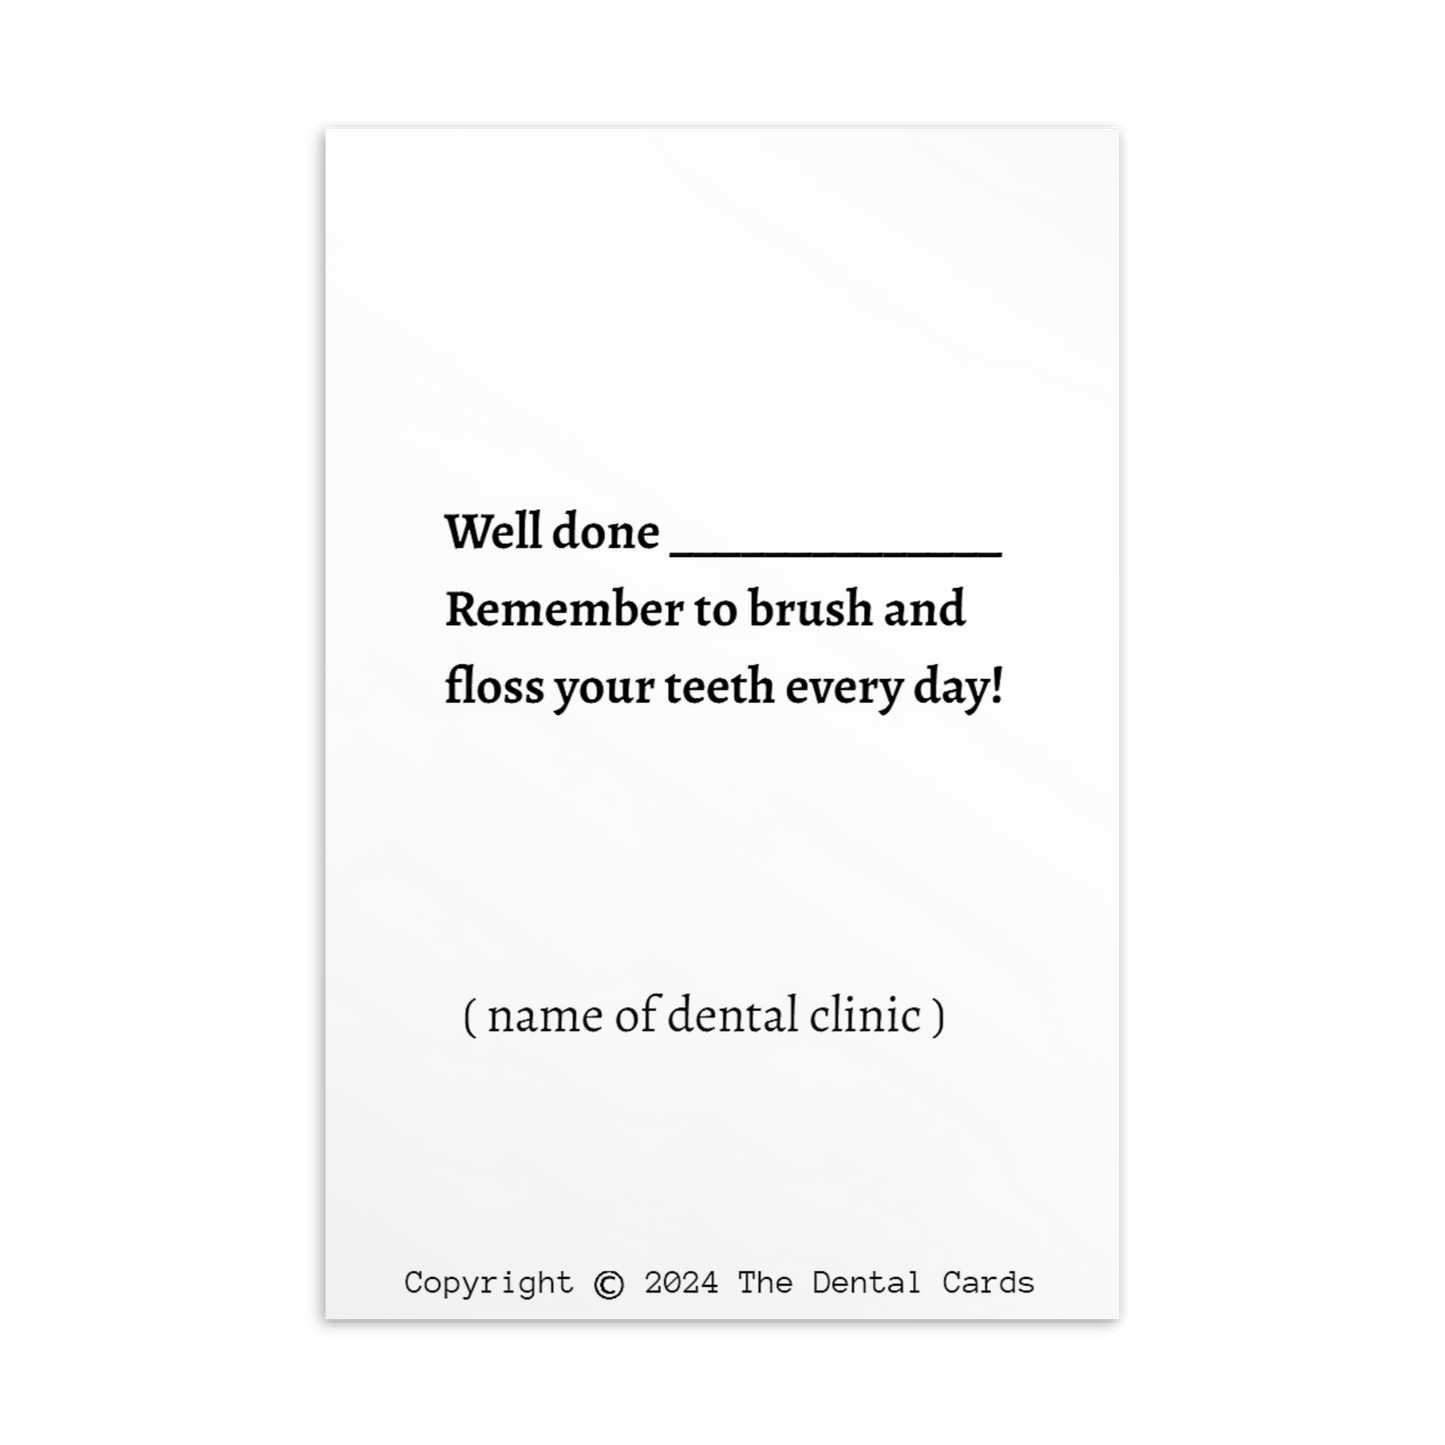 Alice In Wonderland | Dental Motivational & Reward Cards- Well Done, Dental Superstar! Your Teeth Are  Super Healthy And Strong!